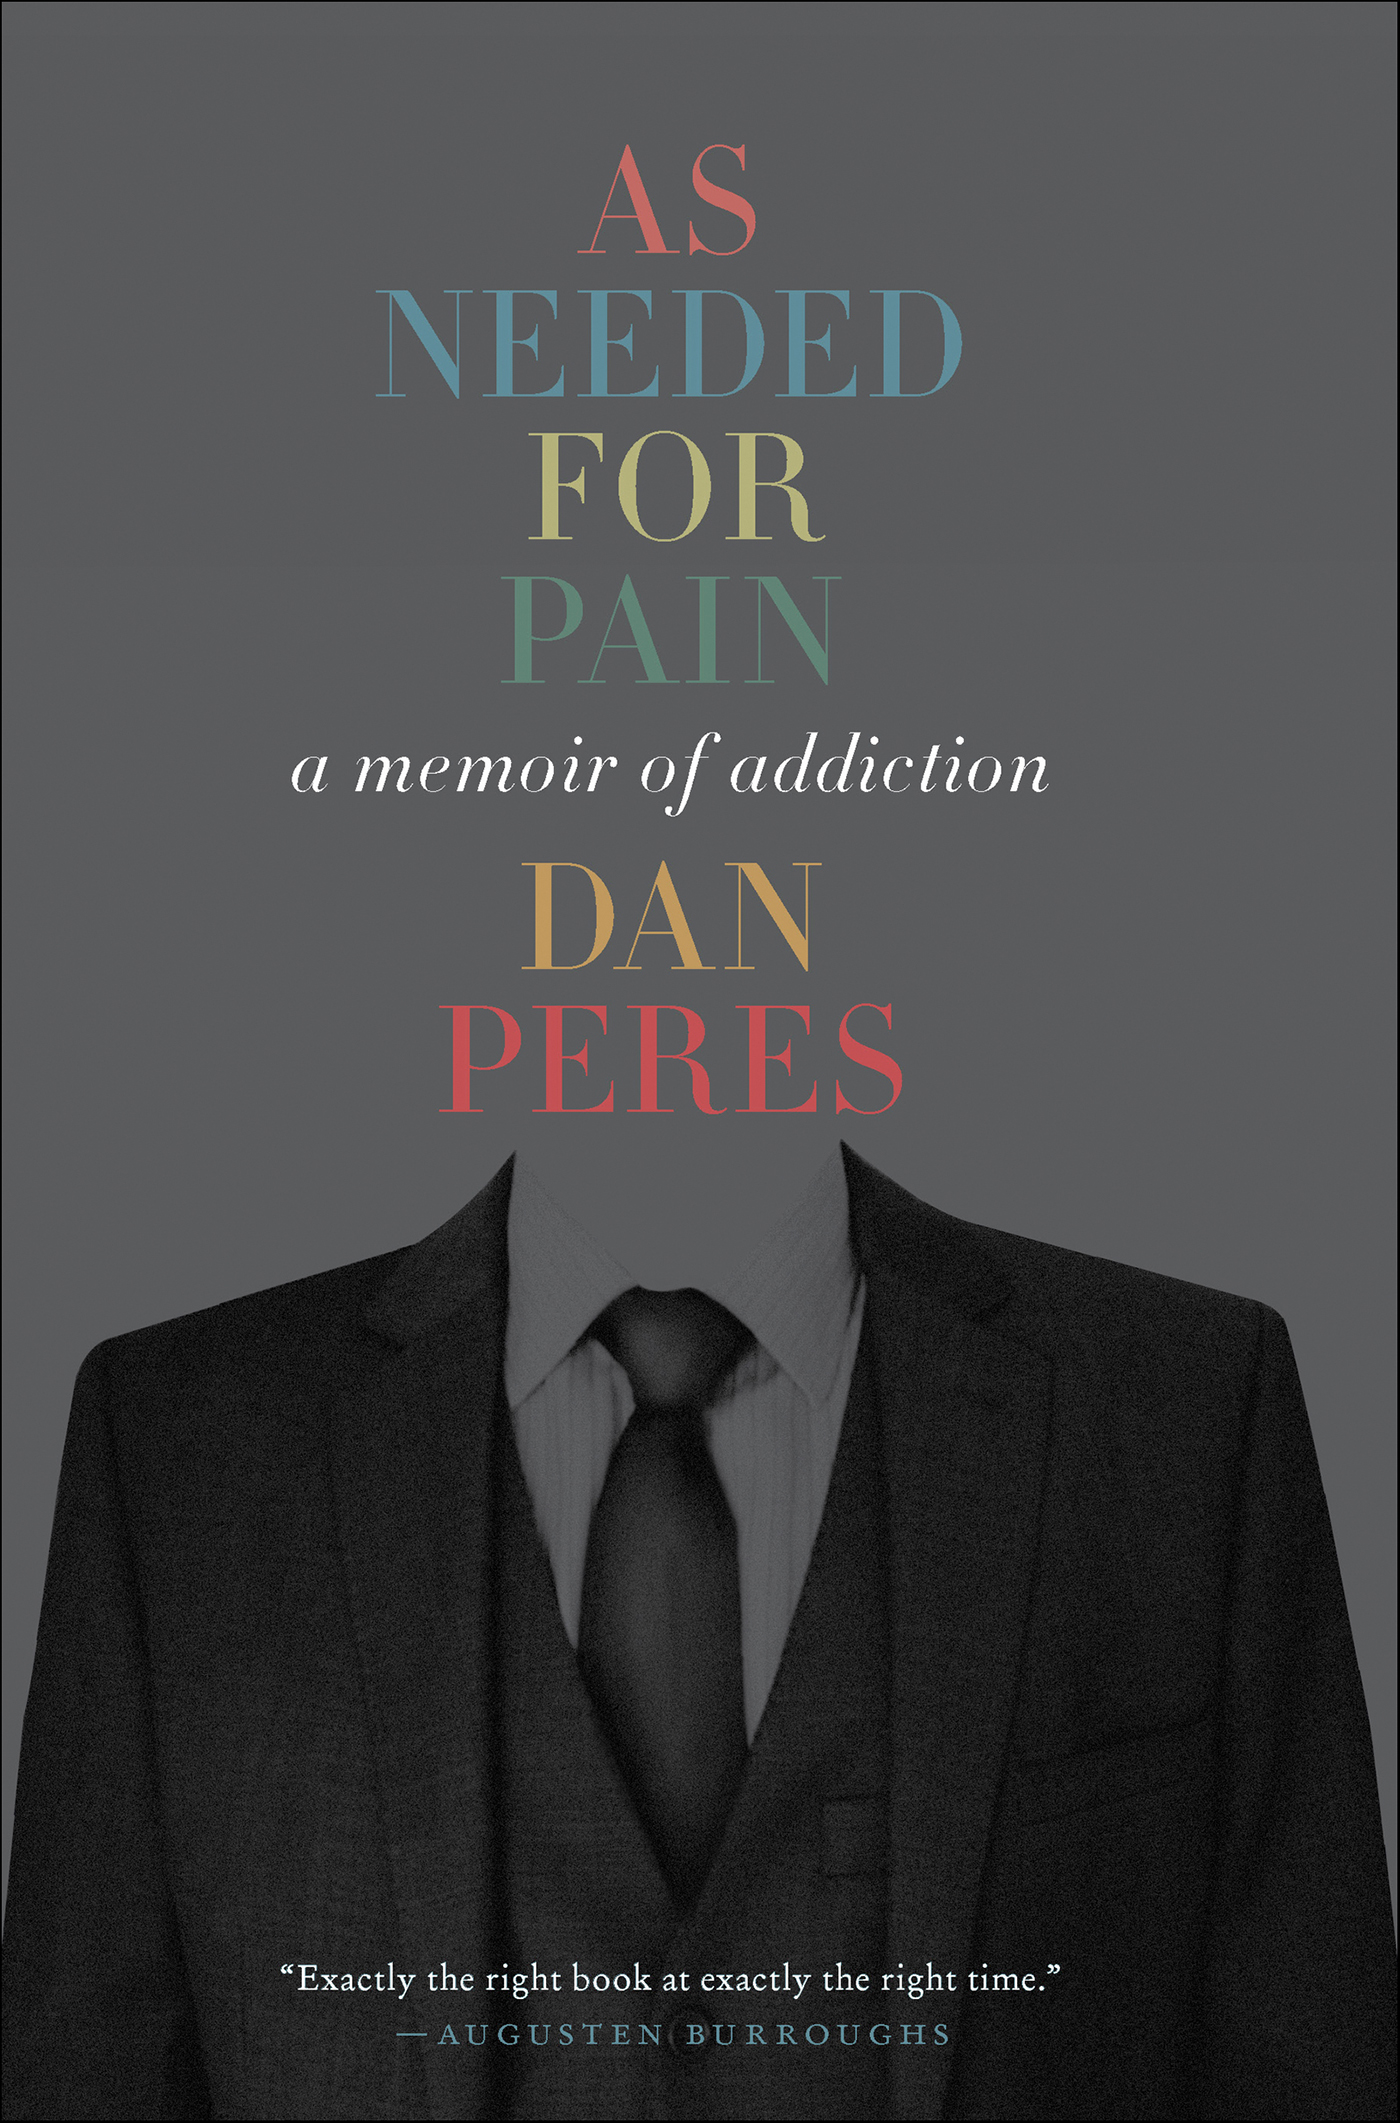 As needed for pain a memoir of addiction cover image